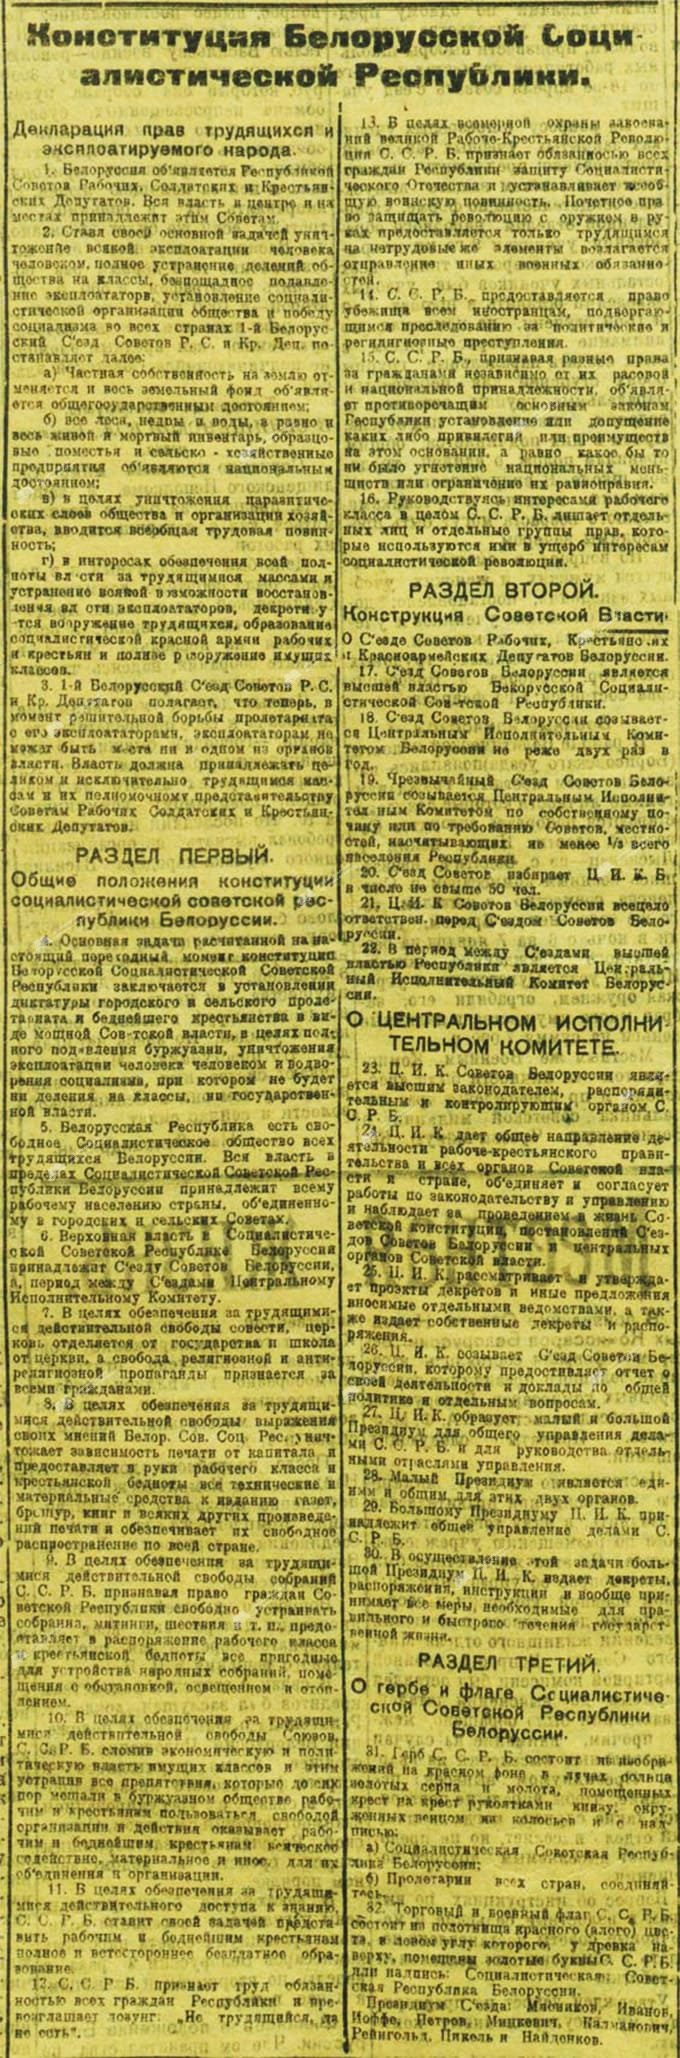 Constitution of the Belarusian Socialist Republic (SSRB) February 3, 1919-с. 0